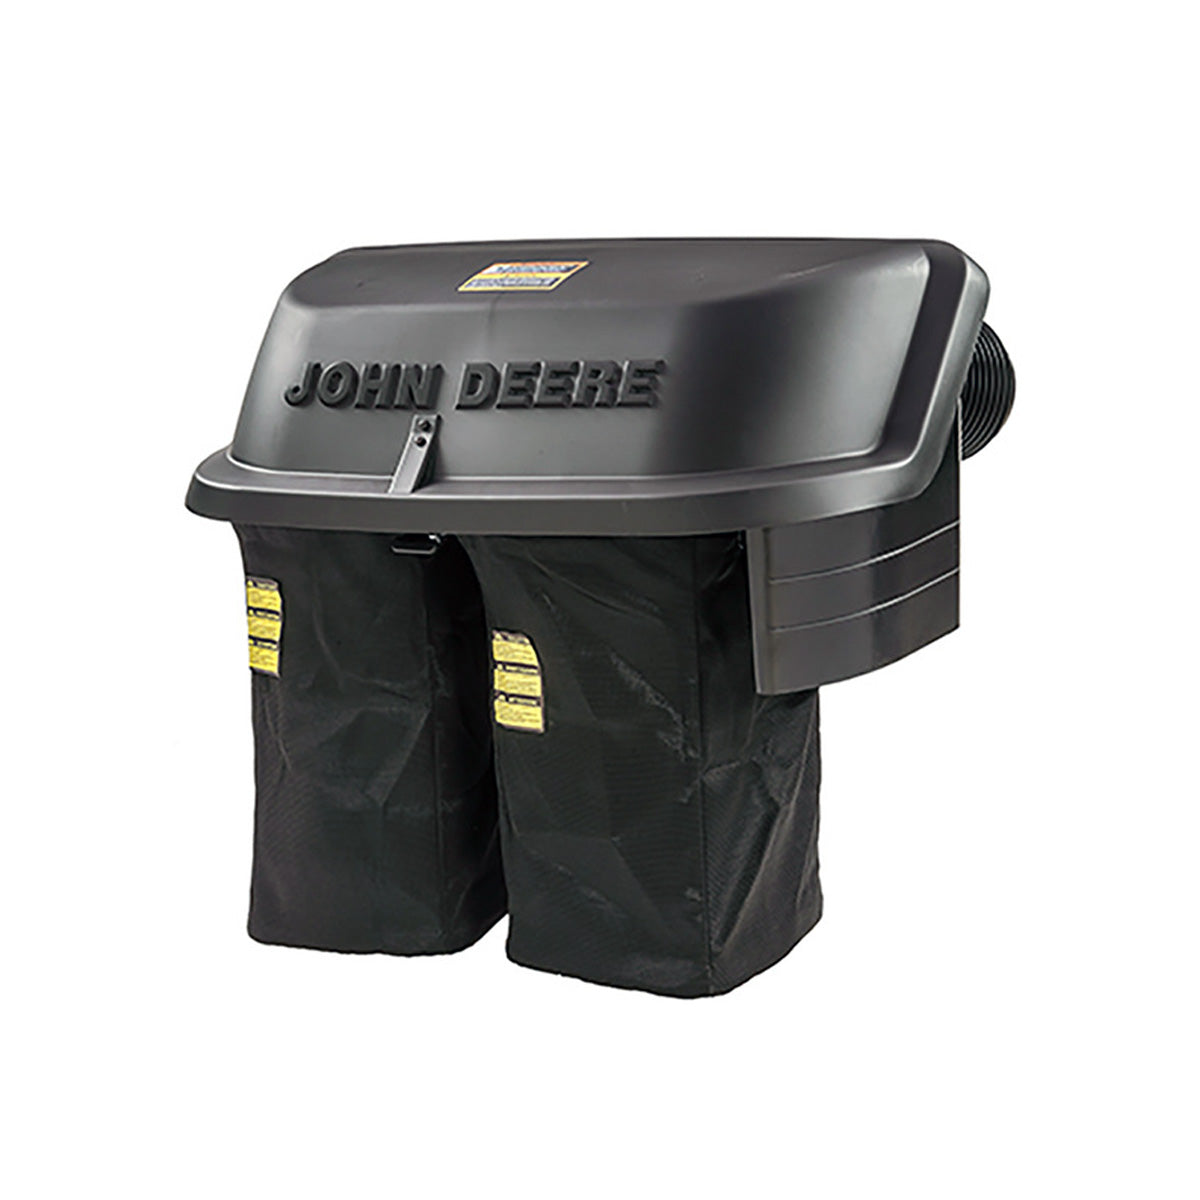 John Deere 2 Bag Material Collection System for X300 & X500 Series Mowers